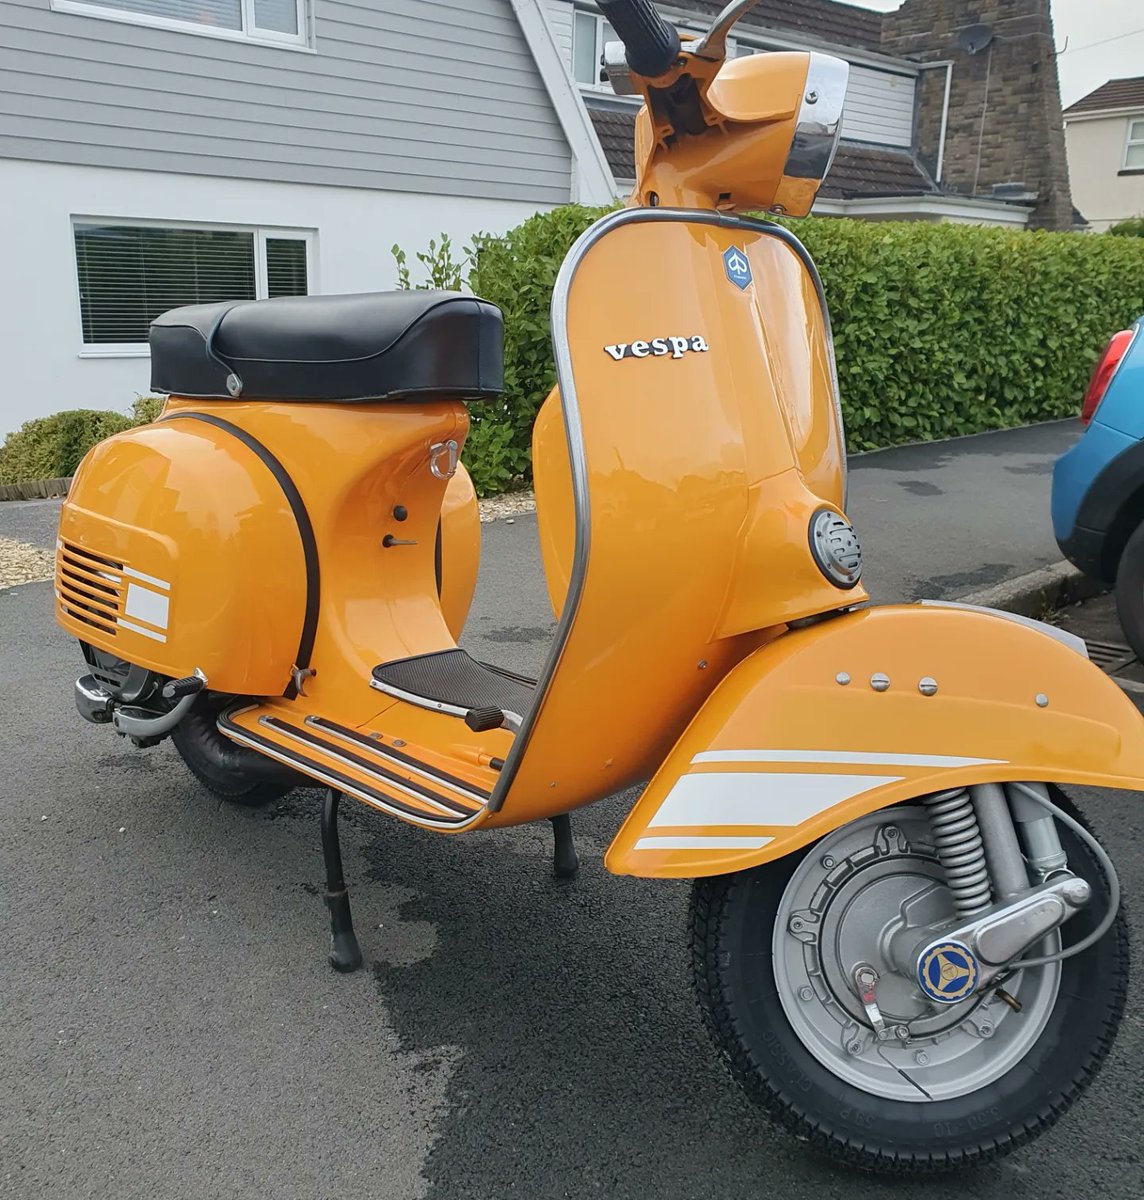 Can't wait for some good weather to get out on this beauty 😍  #Vespa #Rally200 #ItalianStyle #SummersComing